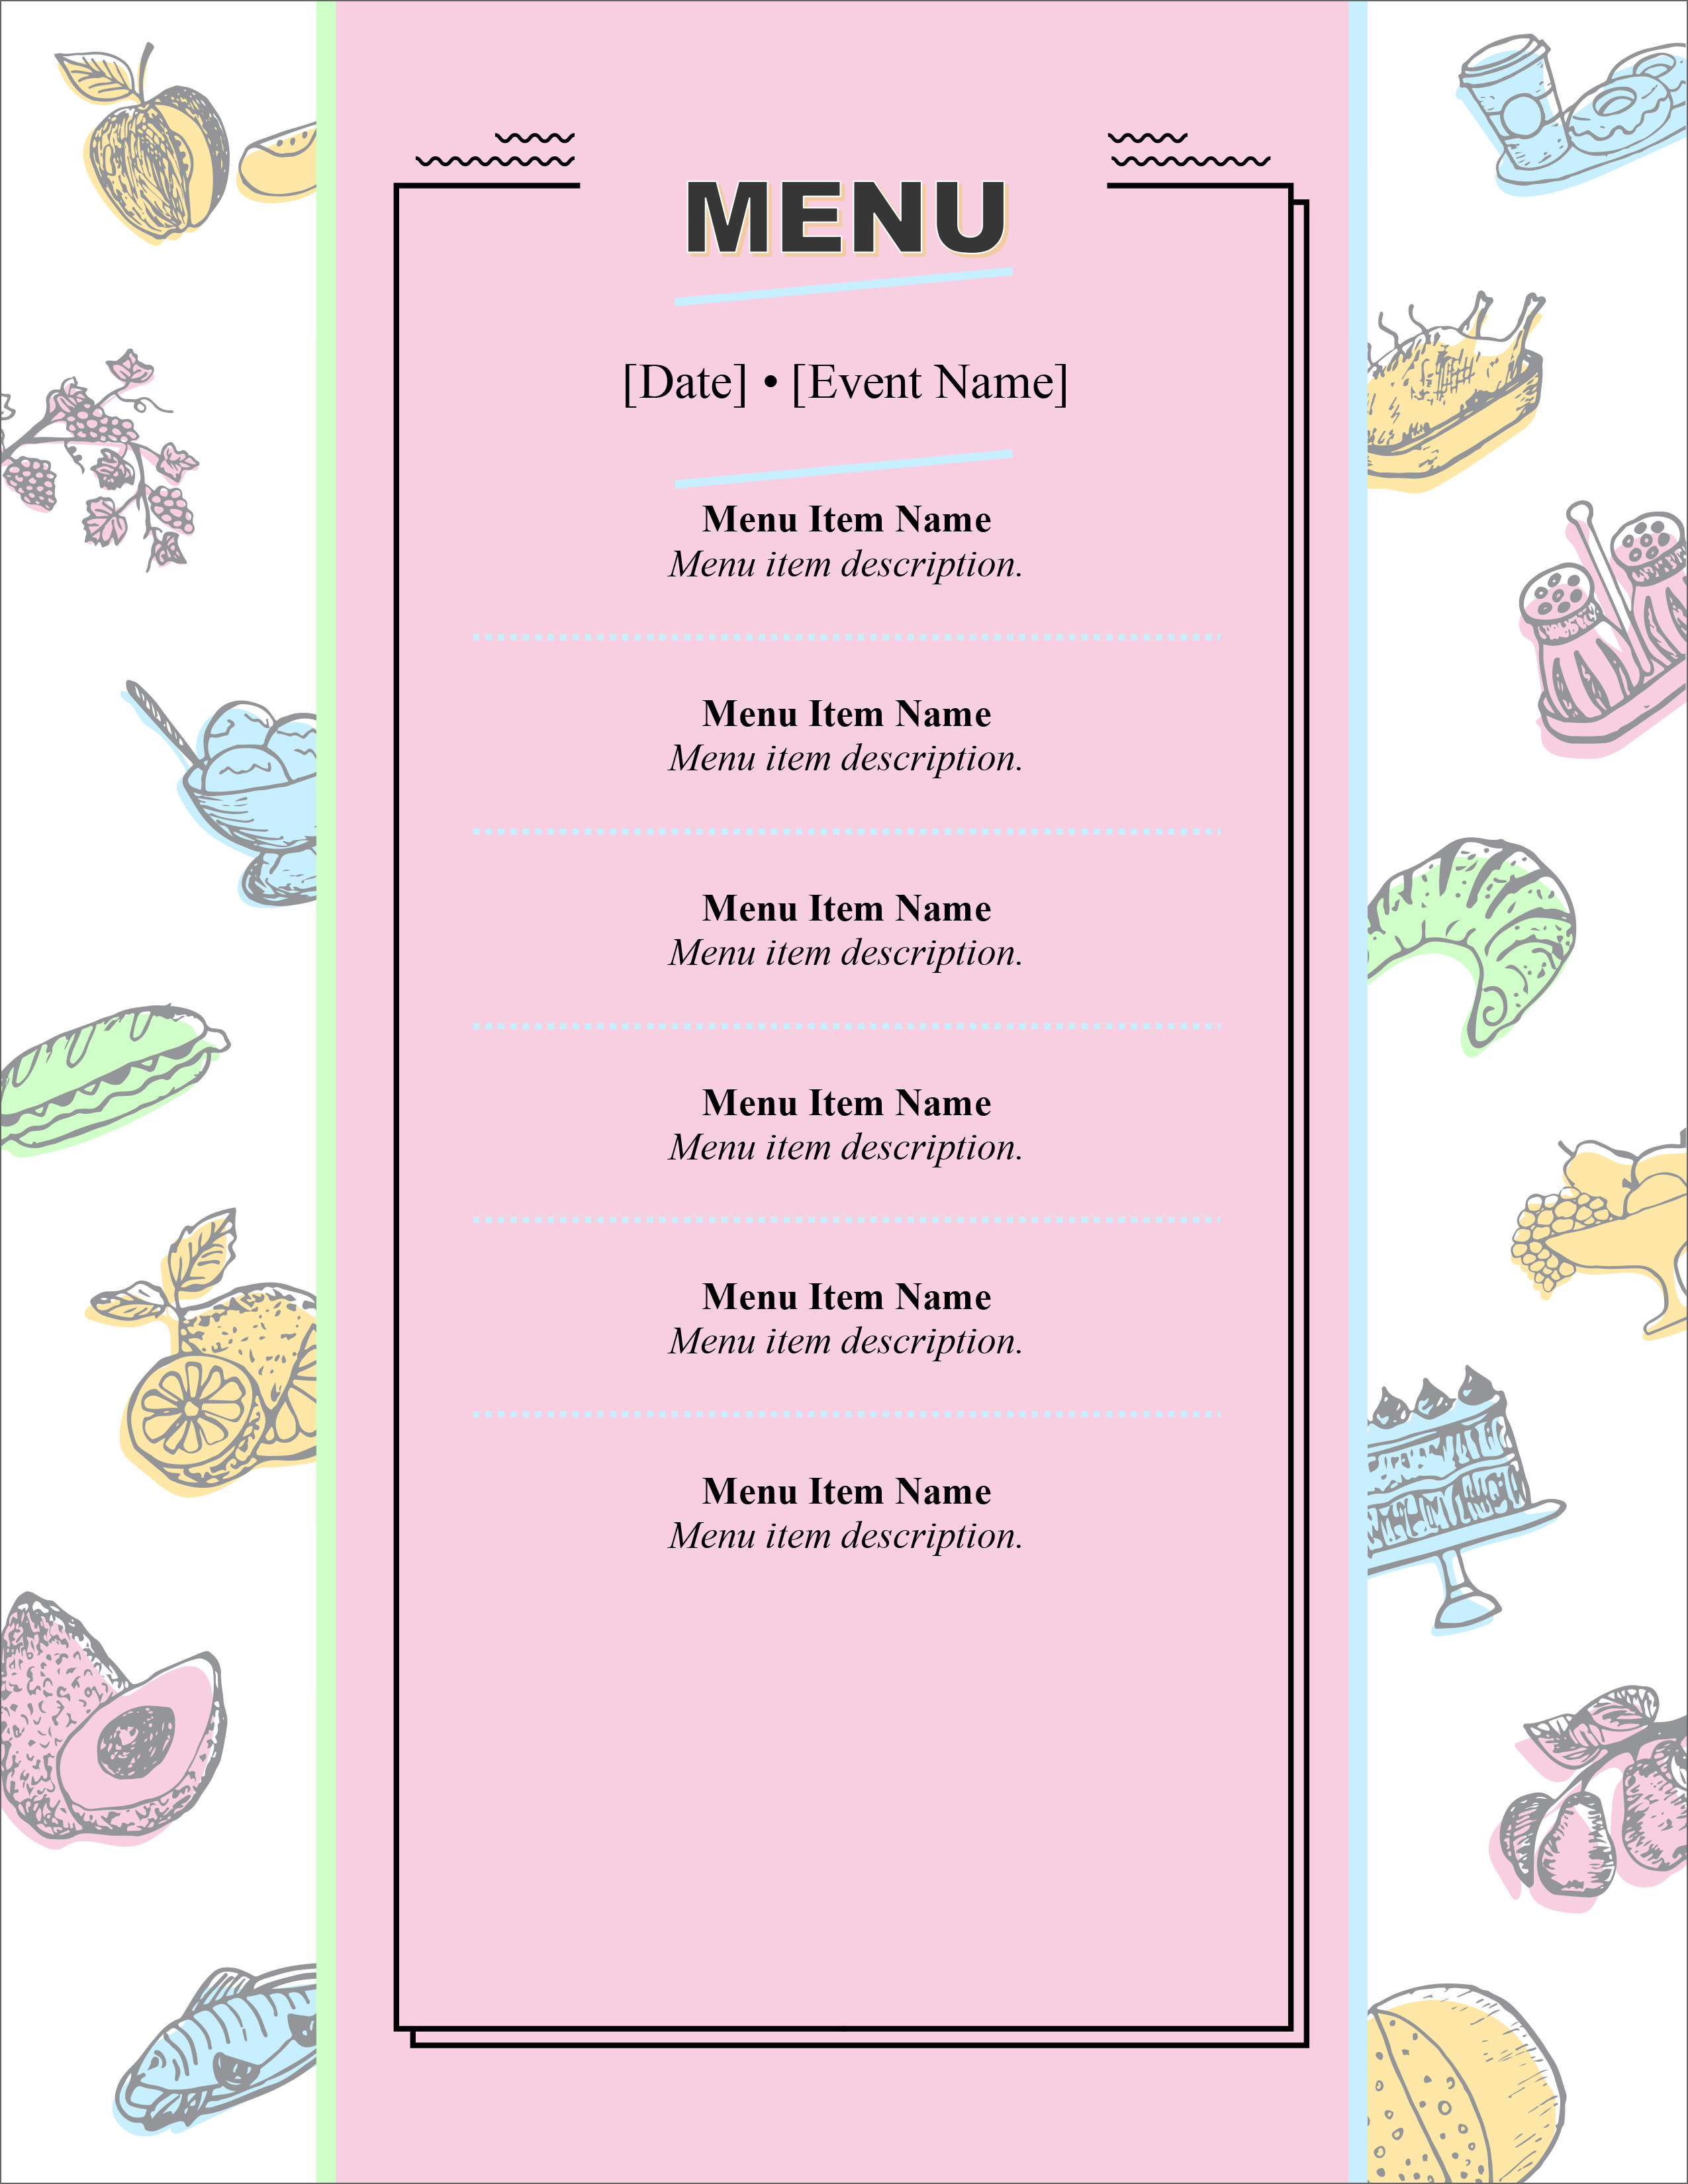 20 Free Simple Menu Templates For Restaurants, Cafes, And Parties With Free Printable Restaurant Menu Templates